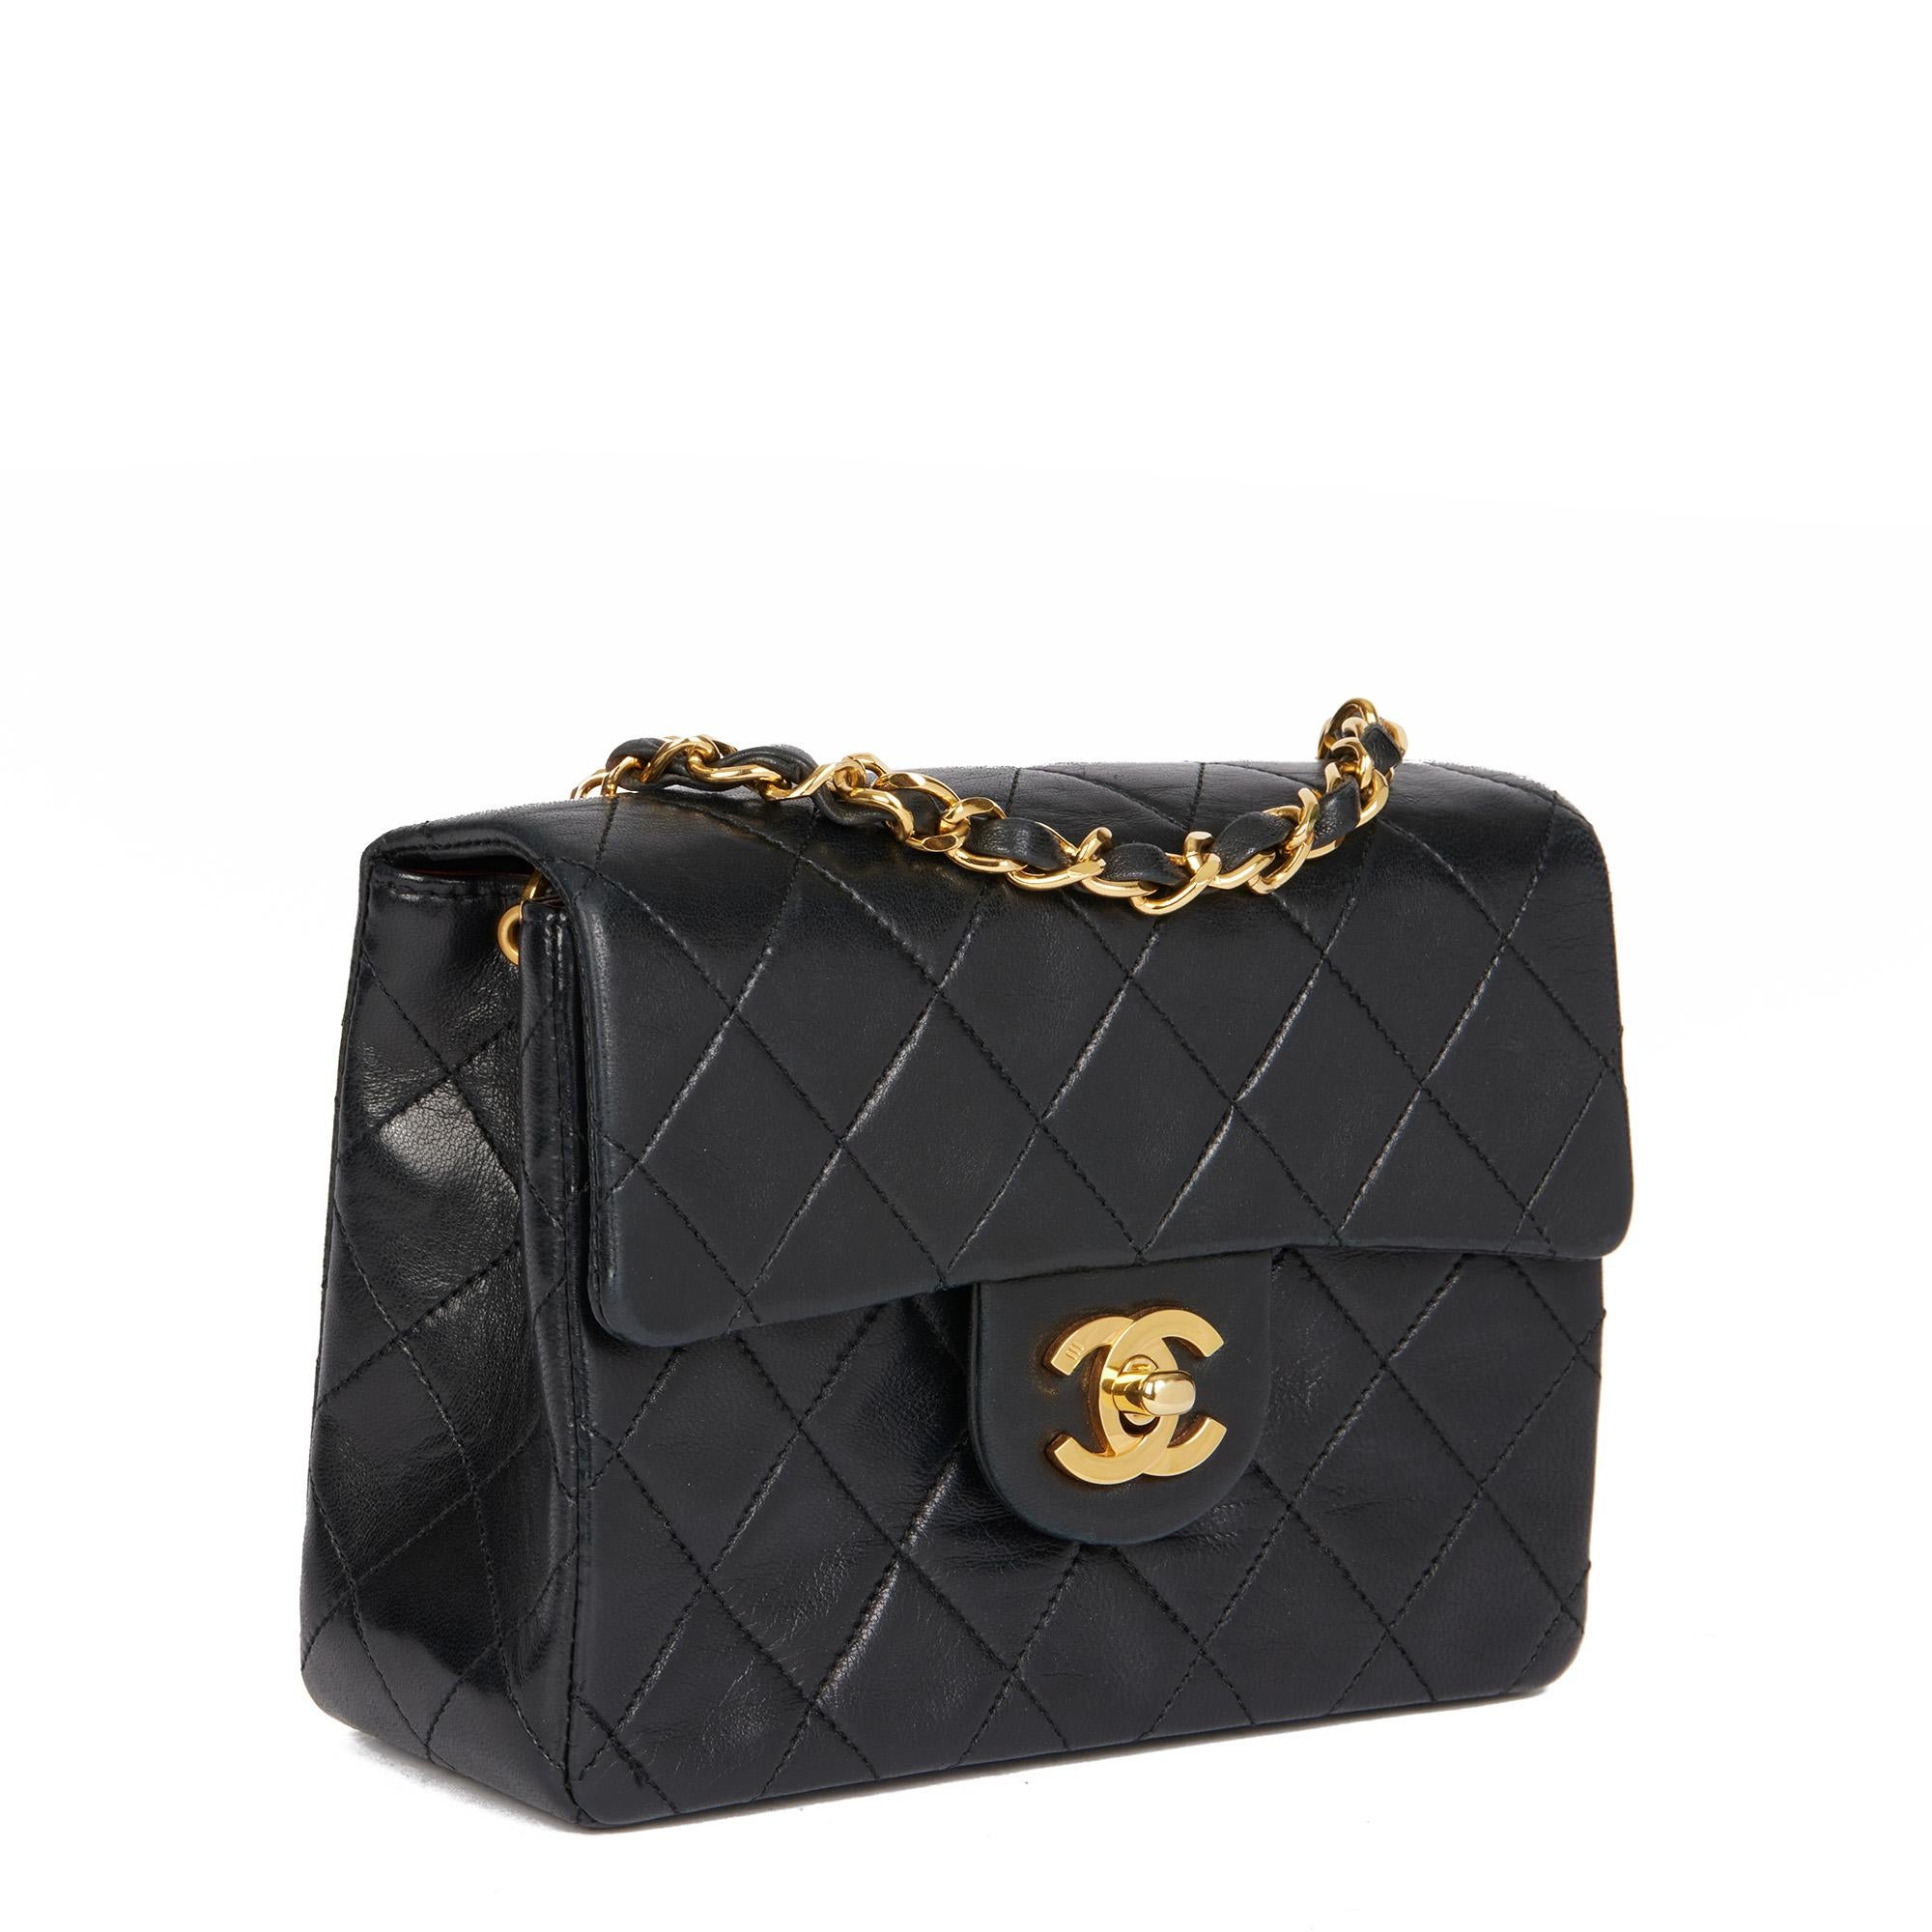 CHANEL
Black Quilted Lambskin Vintage Square Mini Flap Bag

Xupes Reference: HB4657
Serial Number: 1789922
Age (Circa): 1989
Accompanied By: Authenticity Card
Authenticity Details: Authenticity Card, Serial Sticker (Made in France)
Gender: